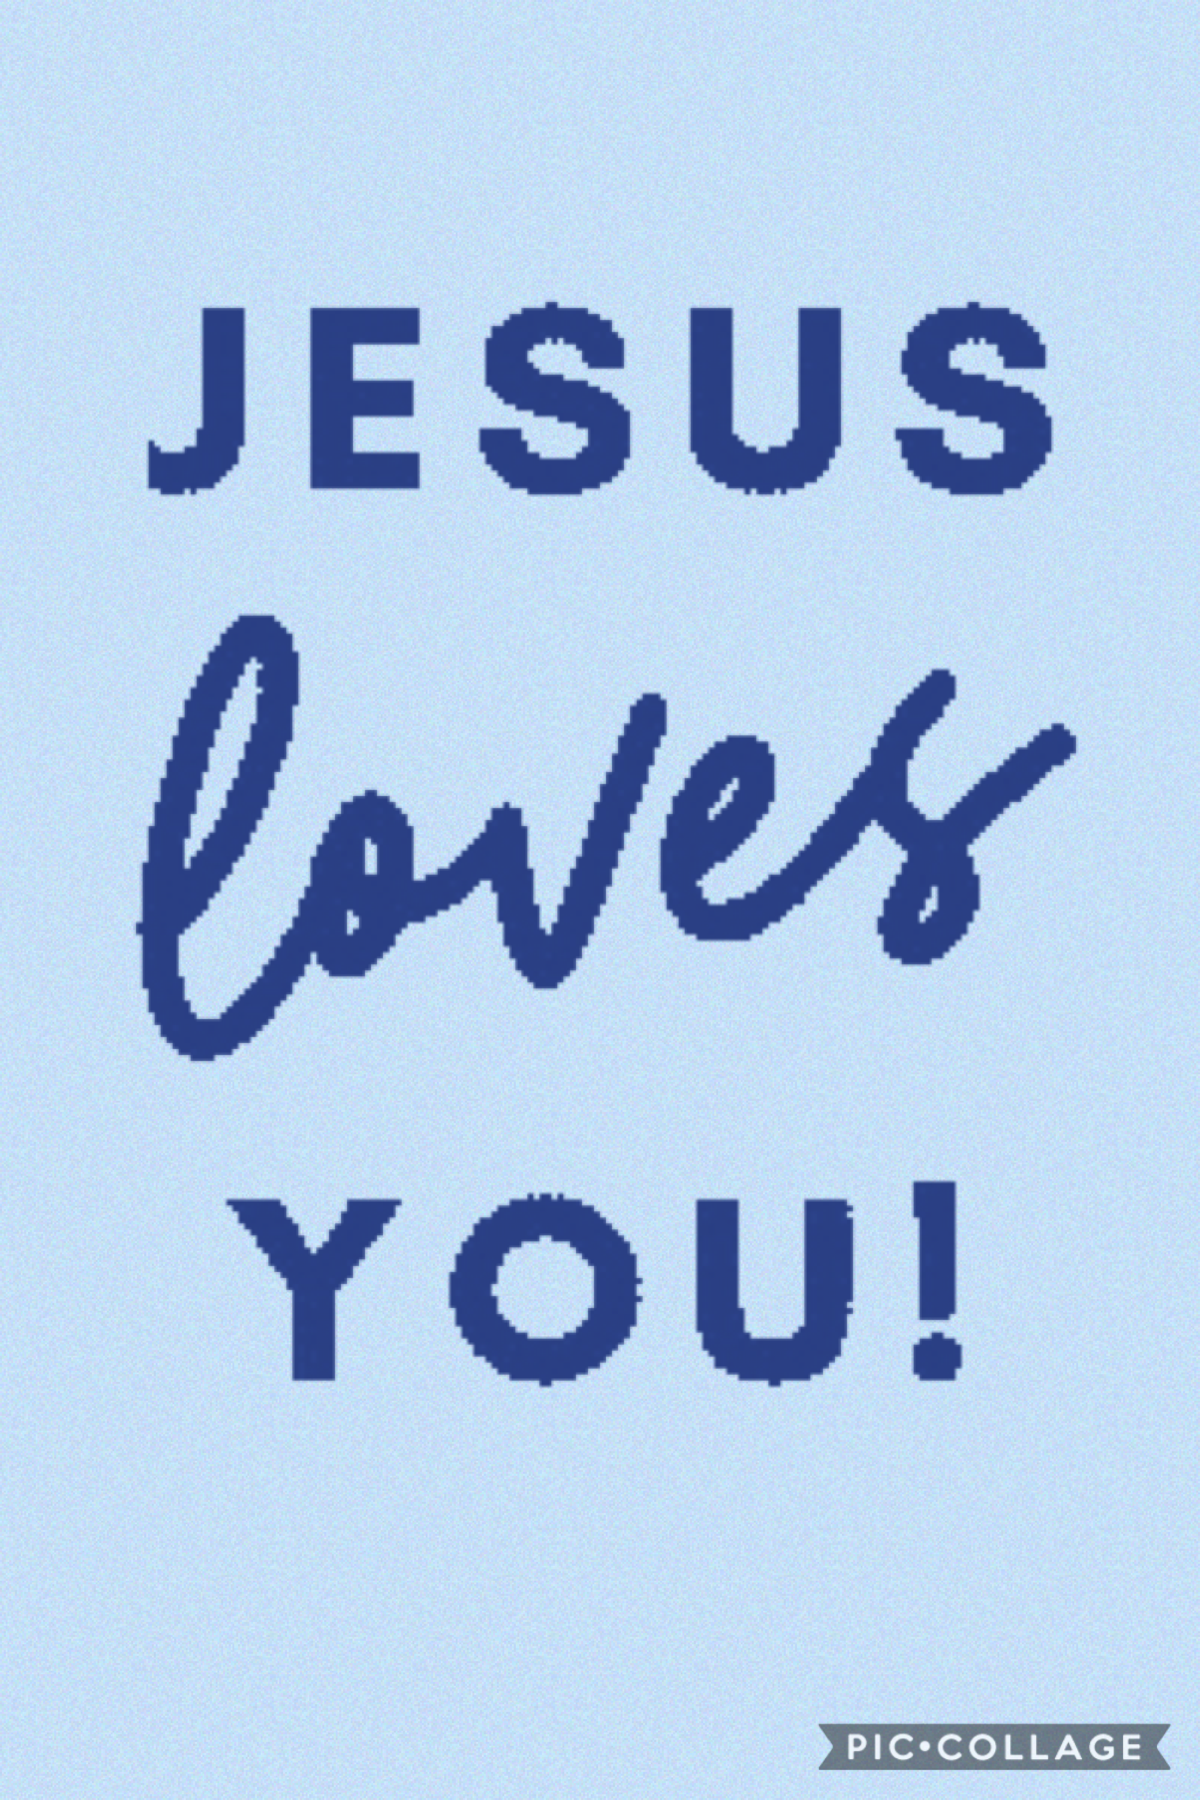 Always remember Jesus loves you know matter what! He will never leave you nor for sake you! Have a great day everyone!😊